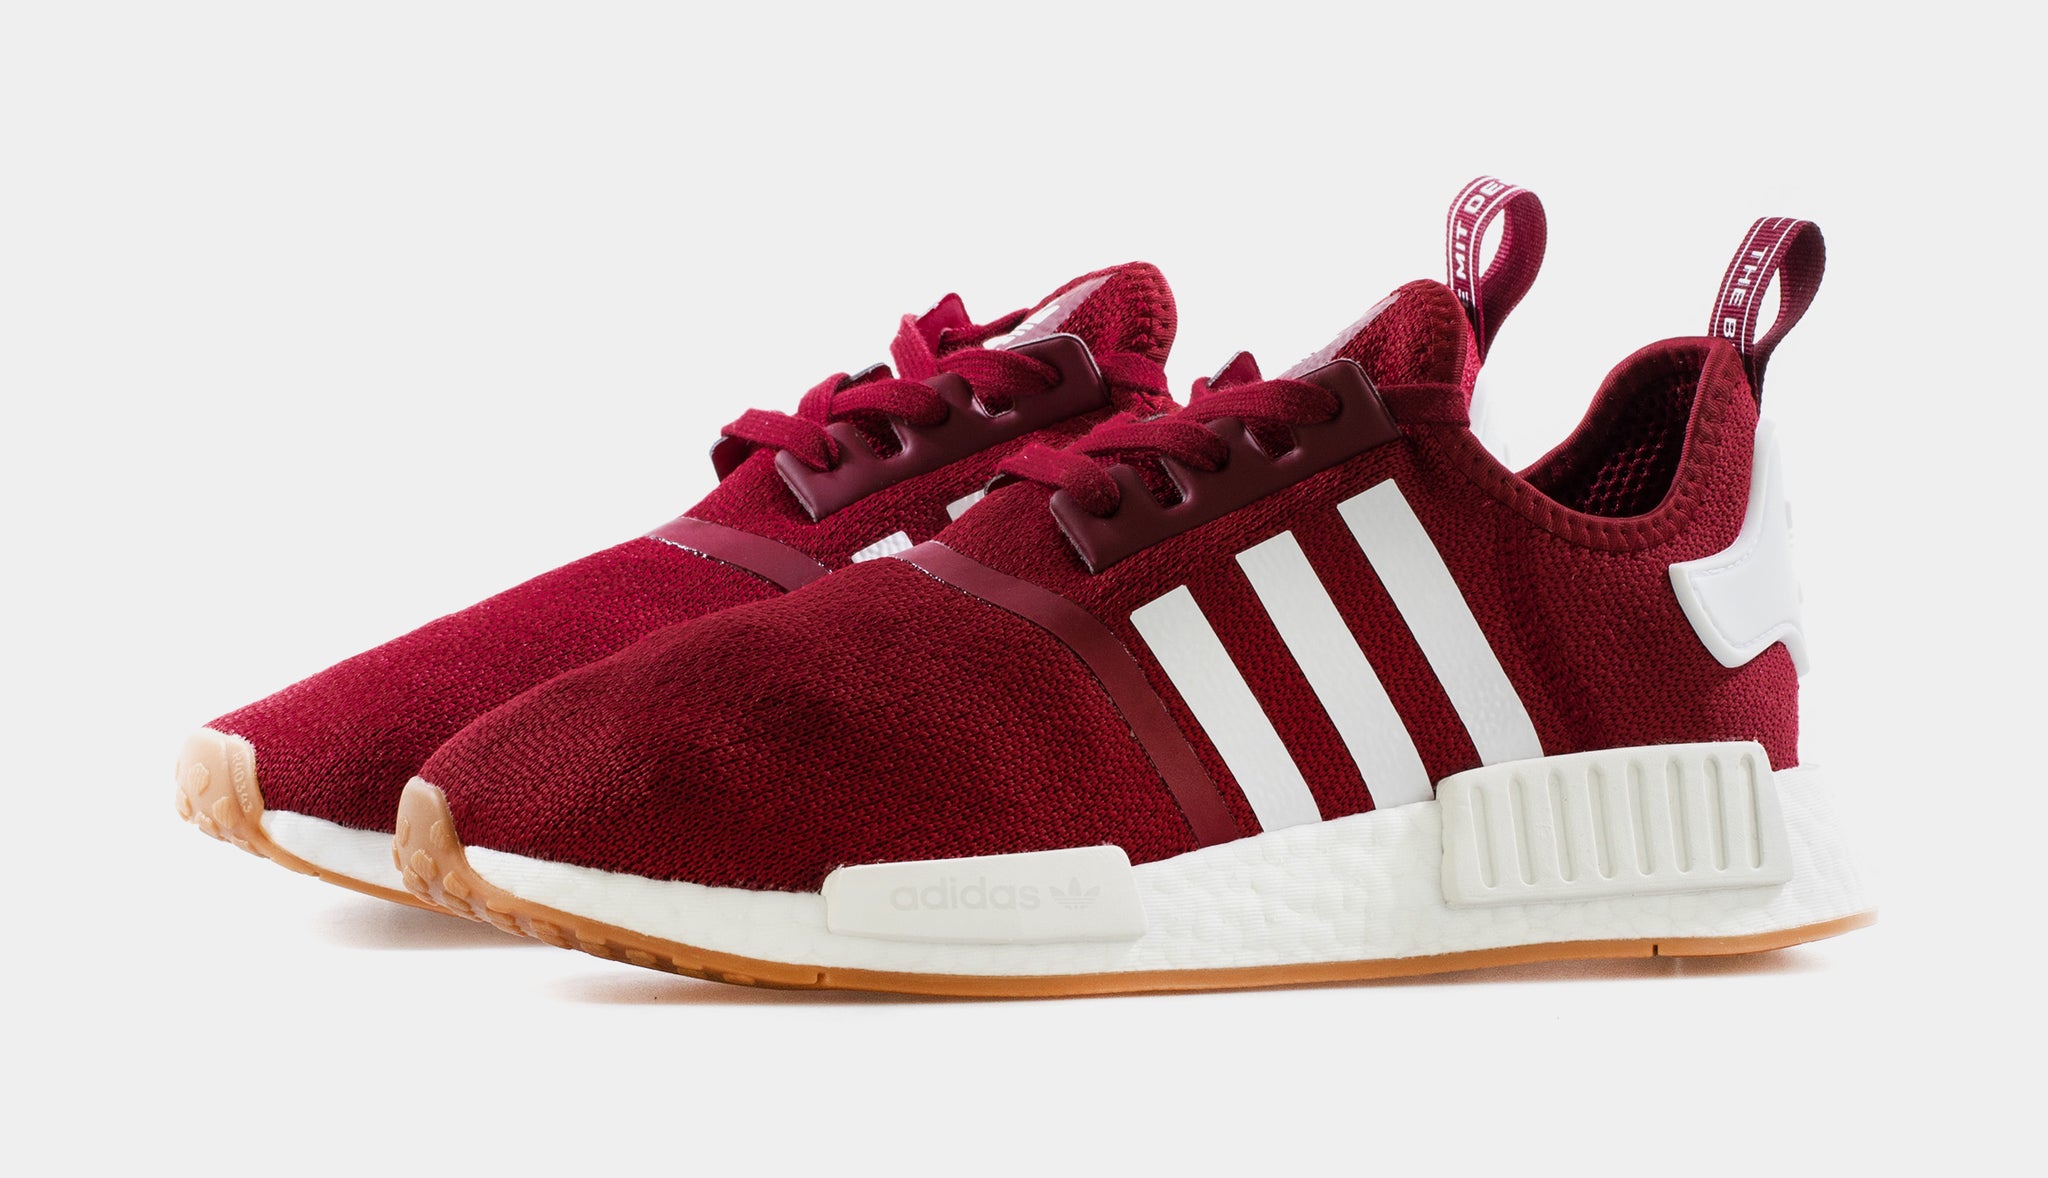 superme X NMD R1 Sup Red Running Shoes For Men - Buy superme X NMD R1 Sup  Red Running Shoes For Men Online at Best Price - Shop Online for Footwears  in